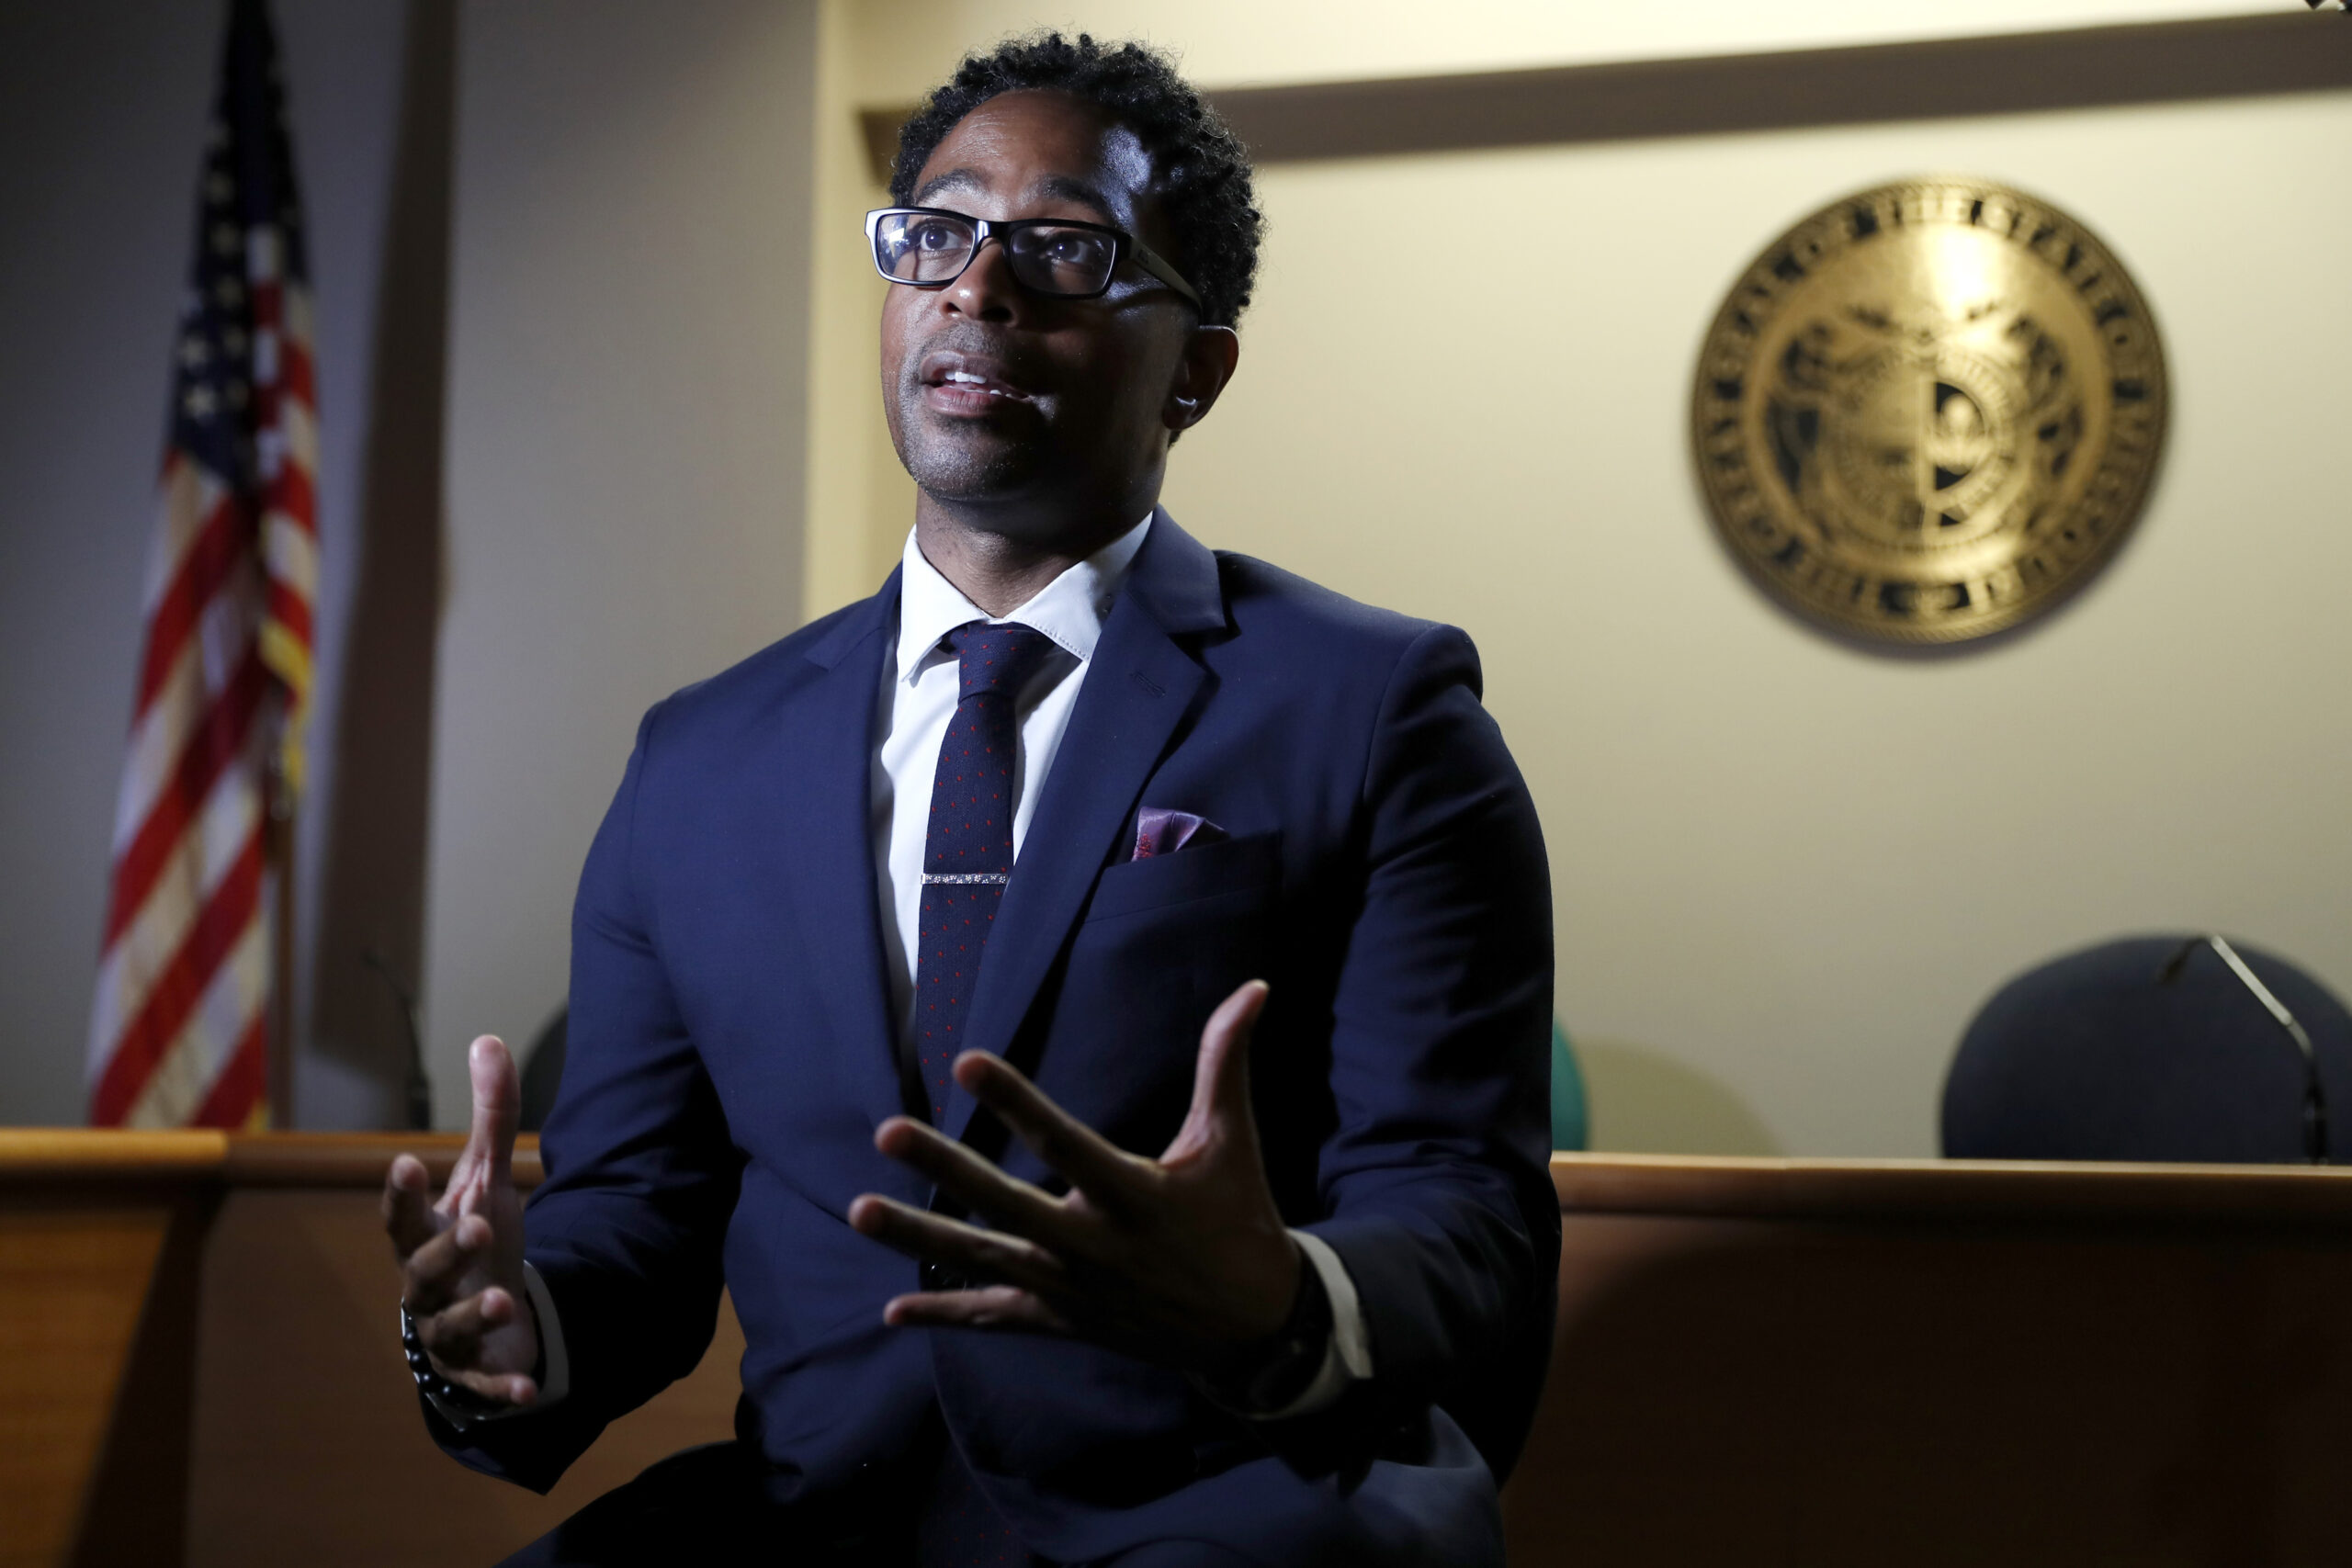 In this July 29, 2019, file photo, St. Louis County Prosecutor Wesley Bell speaks during an interview in Clayton, Missouri. Bell announced Wednesday, June 7, 2023, that he is running for the U.S. Senate seat occupied by Republican Josh Hawley. Bell is a former member of the City Council in Ferguson, Missouri, the St. Louis suburb where the death of 18-year-old Michael Brown at the hands of a police officer in 2014 helped spur the Black Lives Matter movement. Photo credit: Jeff Roberson, The Associated Press